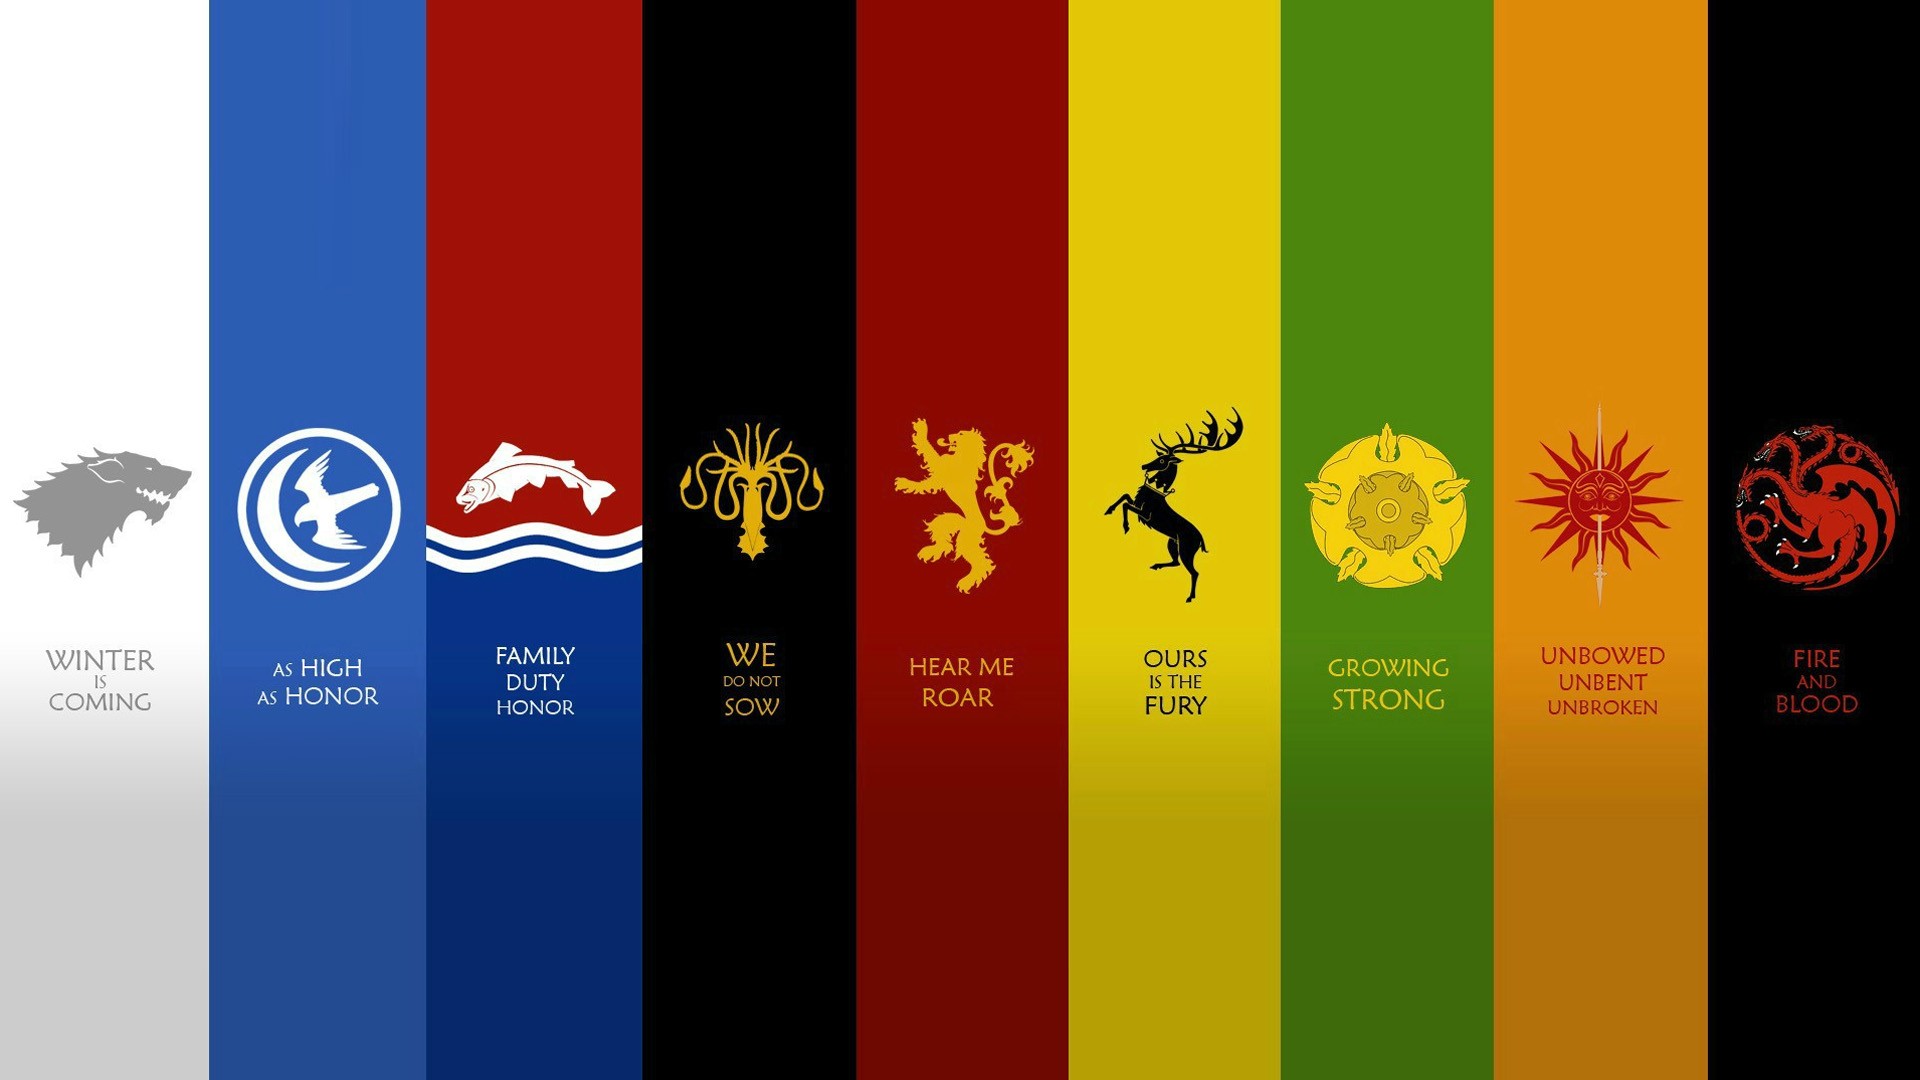 quotes, Houses, Fantasy, Art, Game, Of, Thrones, Emblems, A, Song, Of, Ice, And, Fire, George, R, , R, , Martin, House, Arryn, House, Mormont, House, Greyjoy, House, Lannister, House, Stark, House, Targaryen, Ho Wallpaper